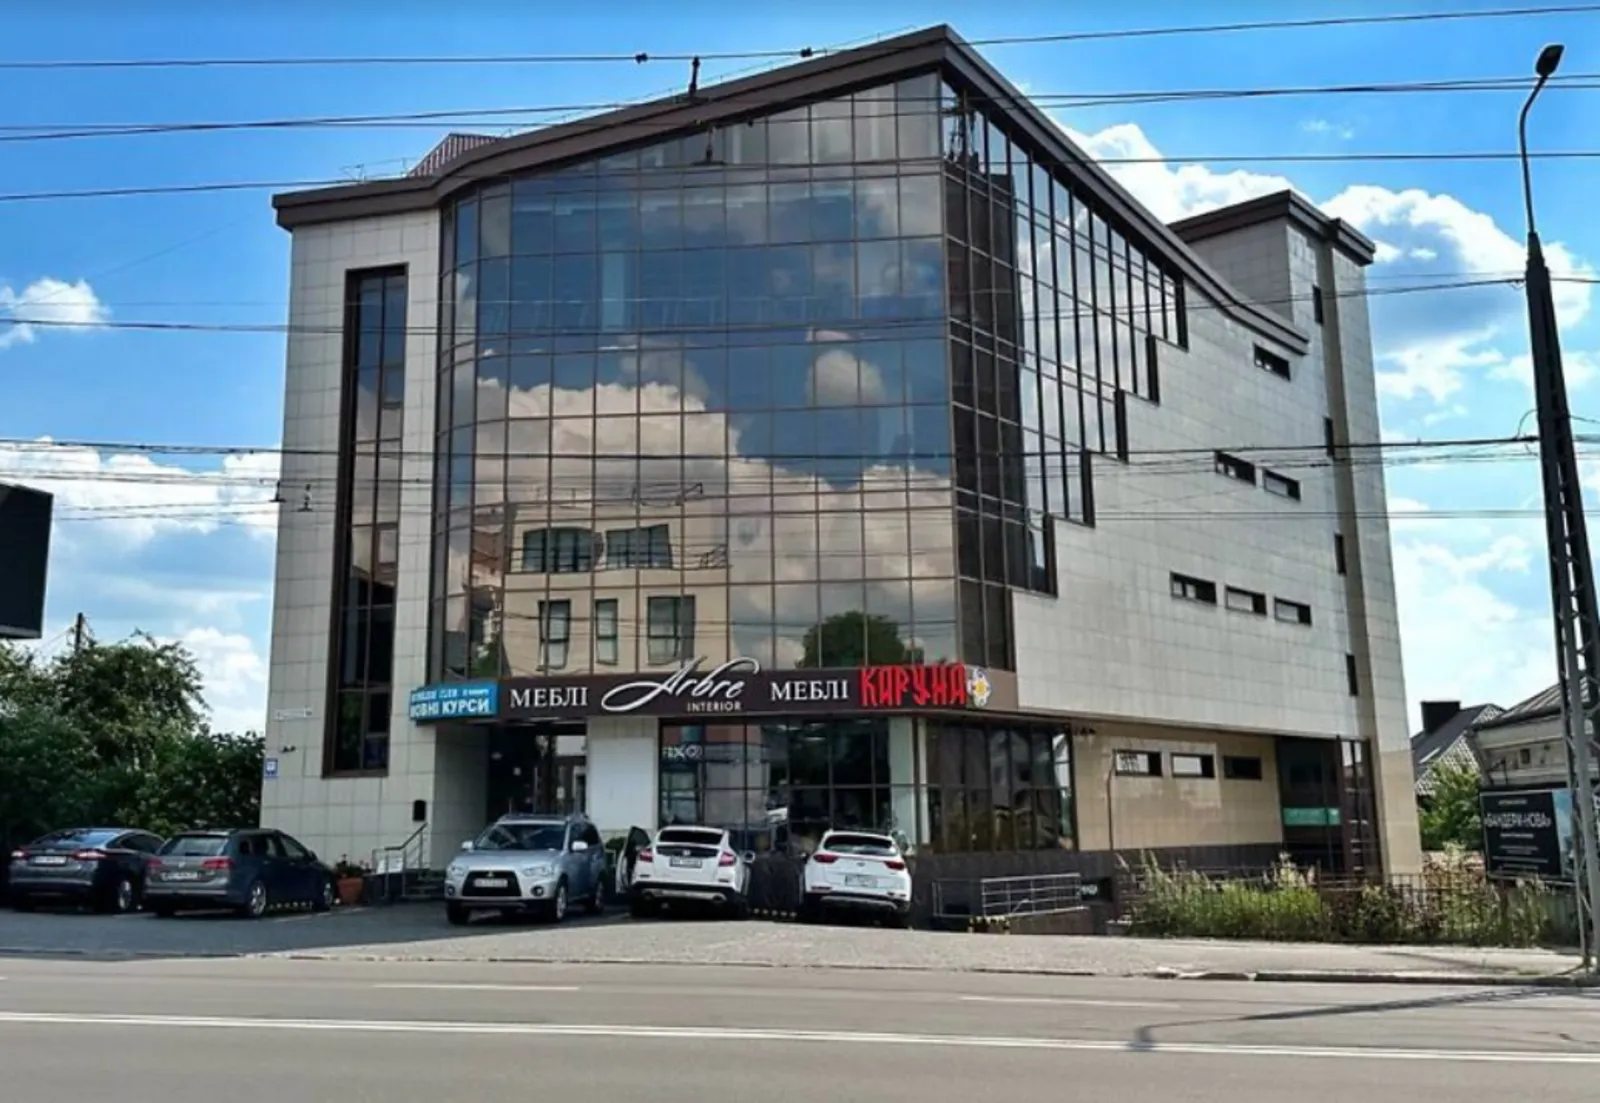 Real estate for sale for commercial purposes. 312 m², 1st floor/5 floors. Vostochnyy, Ternopil. 